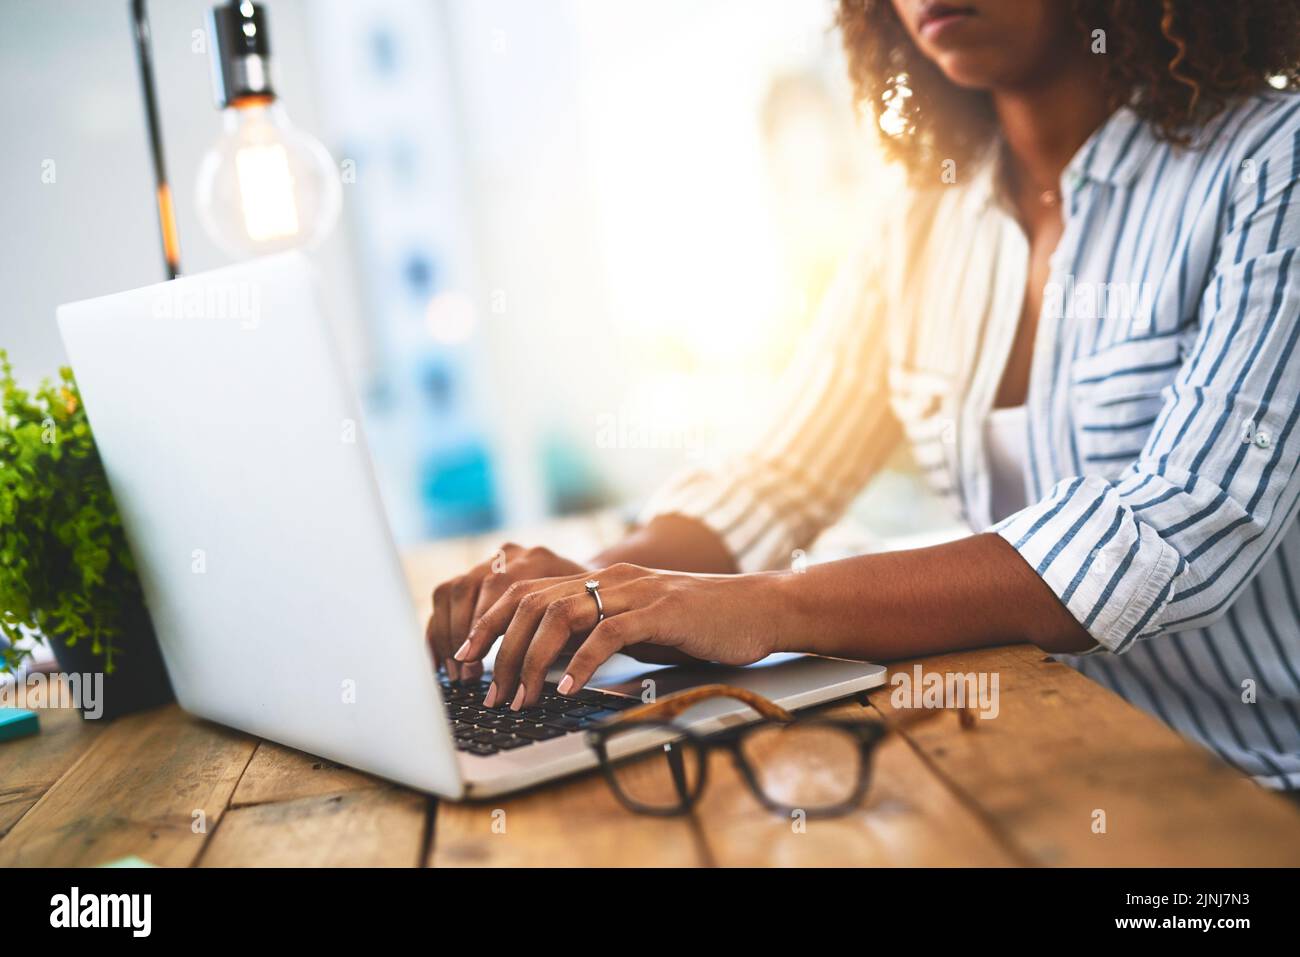 Hands of a woman working with her laptop on a wooden table indoors. Closeup of entrepreneur typing in an open plan home office. Female blog writer Stock Photo